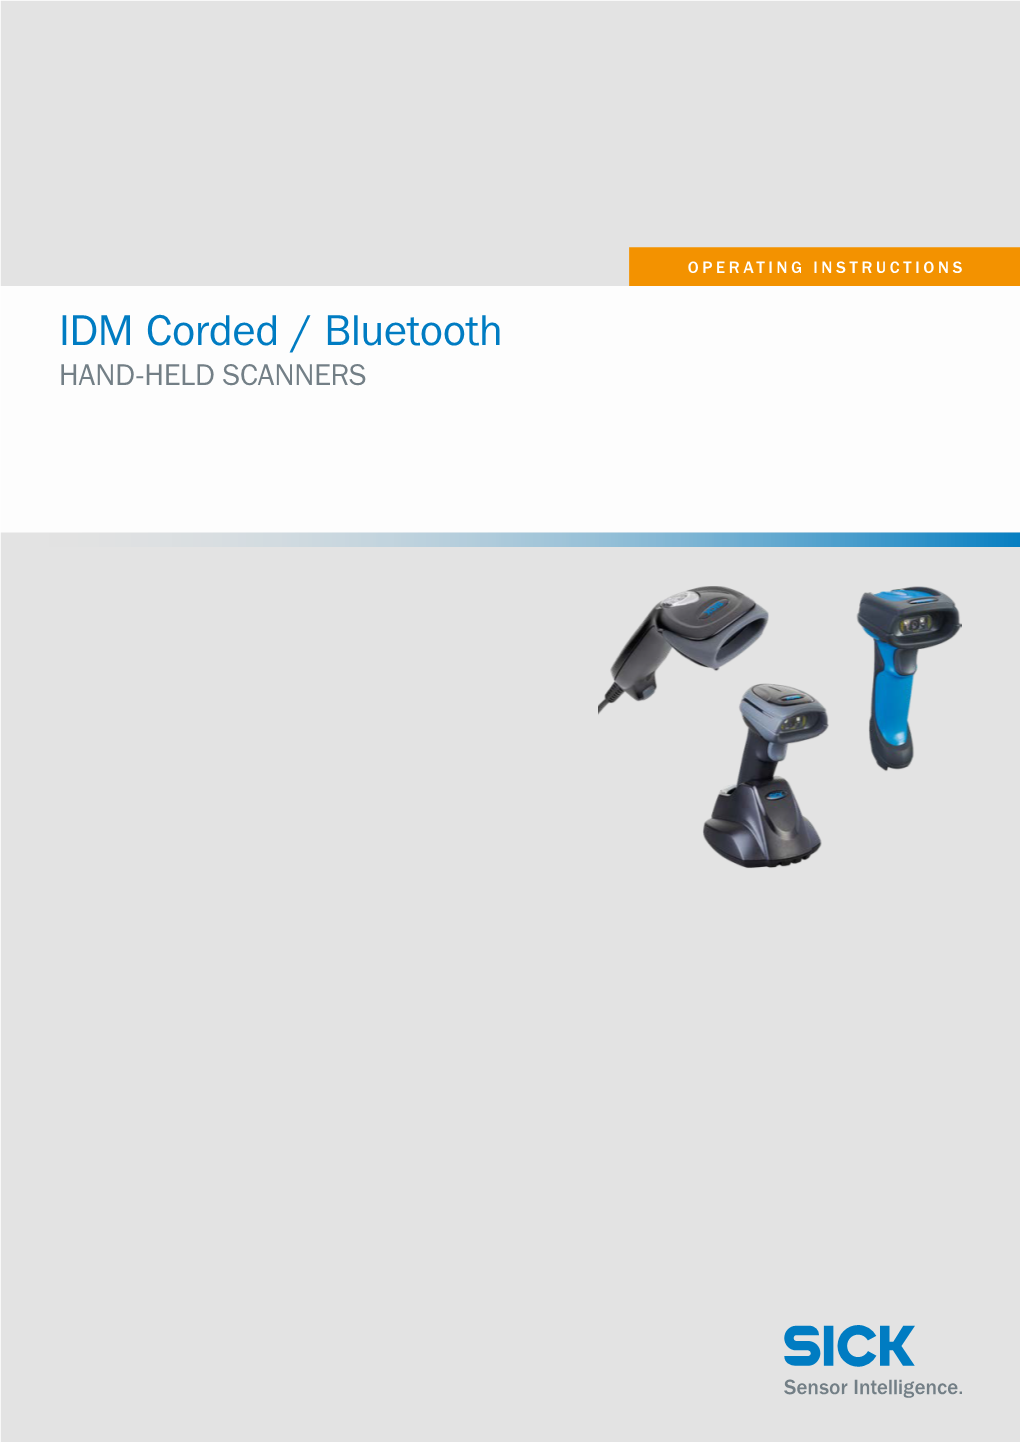 OPERATING INSTRUCTIONS IDM Corded / Bluetooth HAND-HELD SCANNERS General Remarks Operating Instructions IDM Corded & IDM Bluetooth